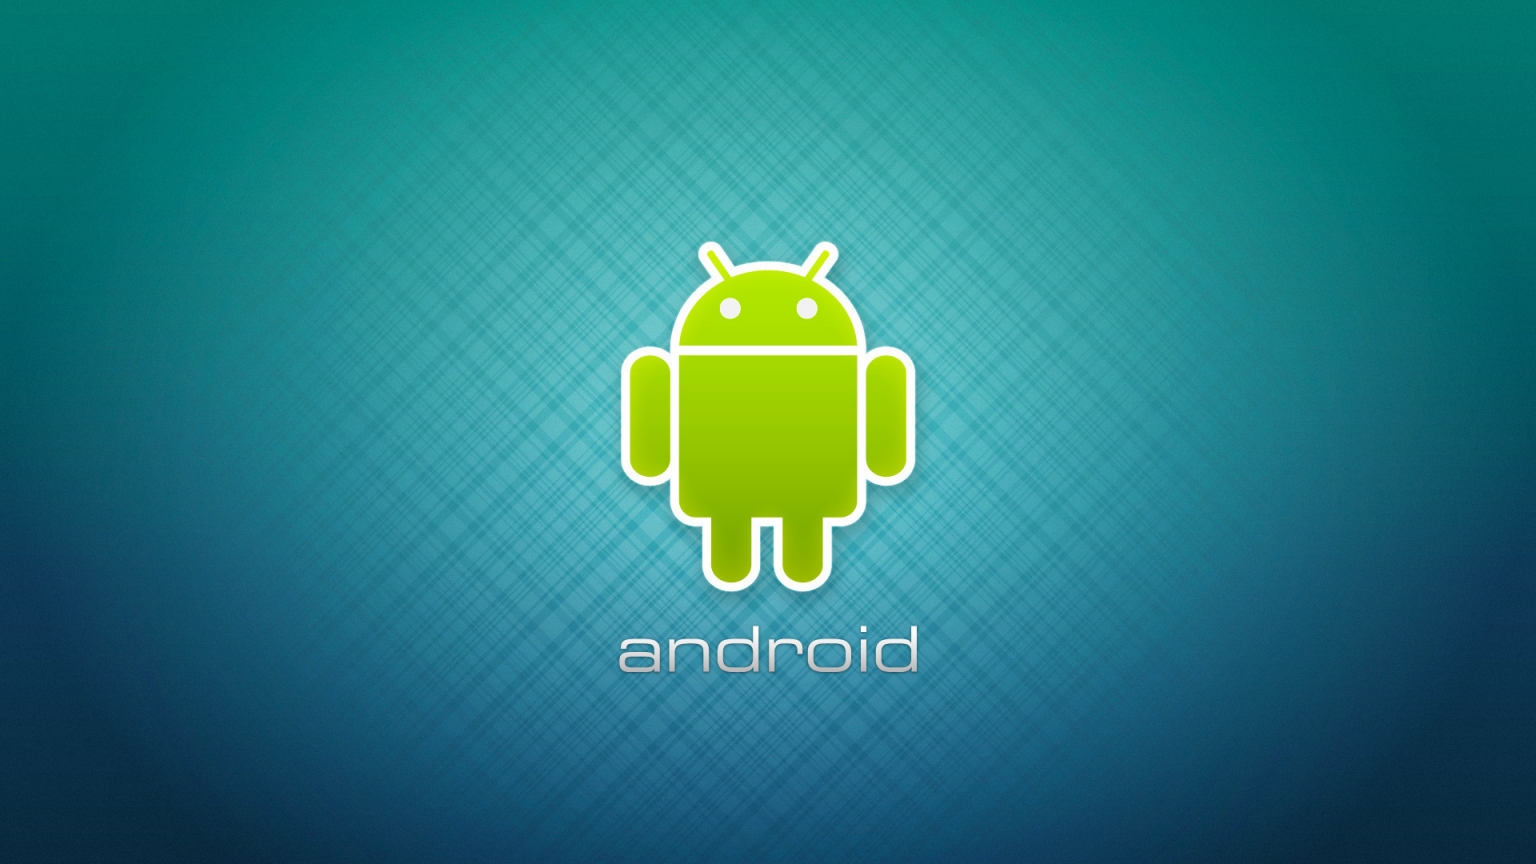 Just Android Logo for 1536 x 864 HDTV resolution